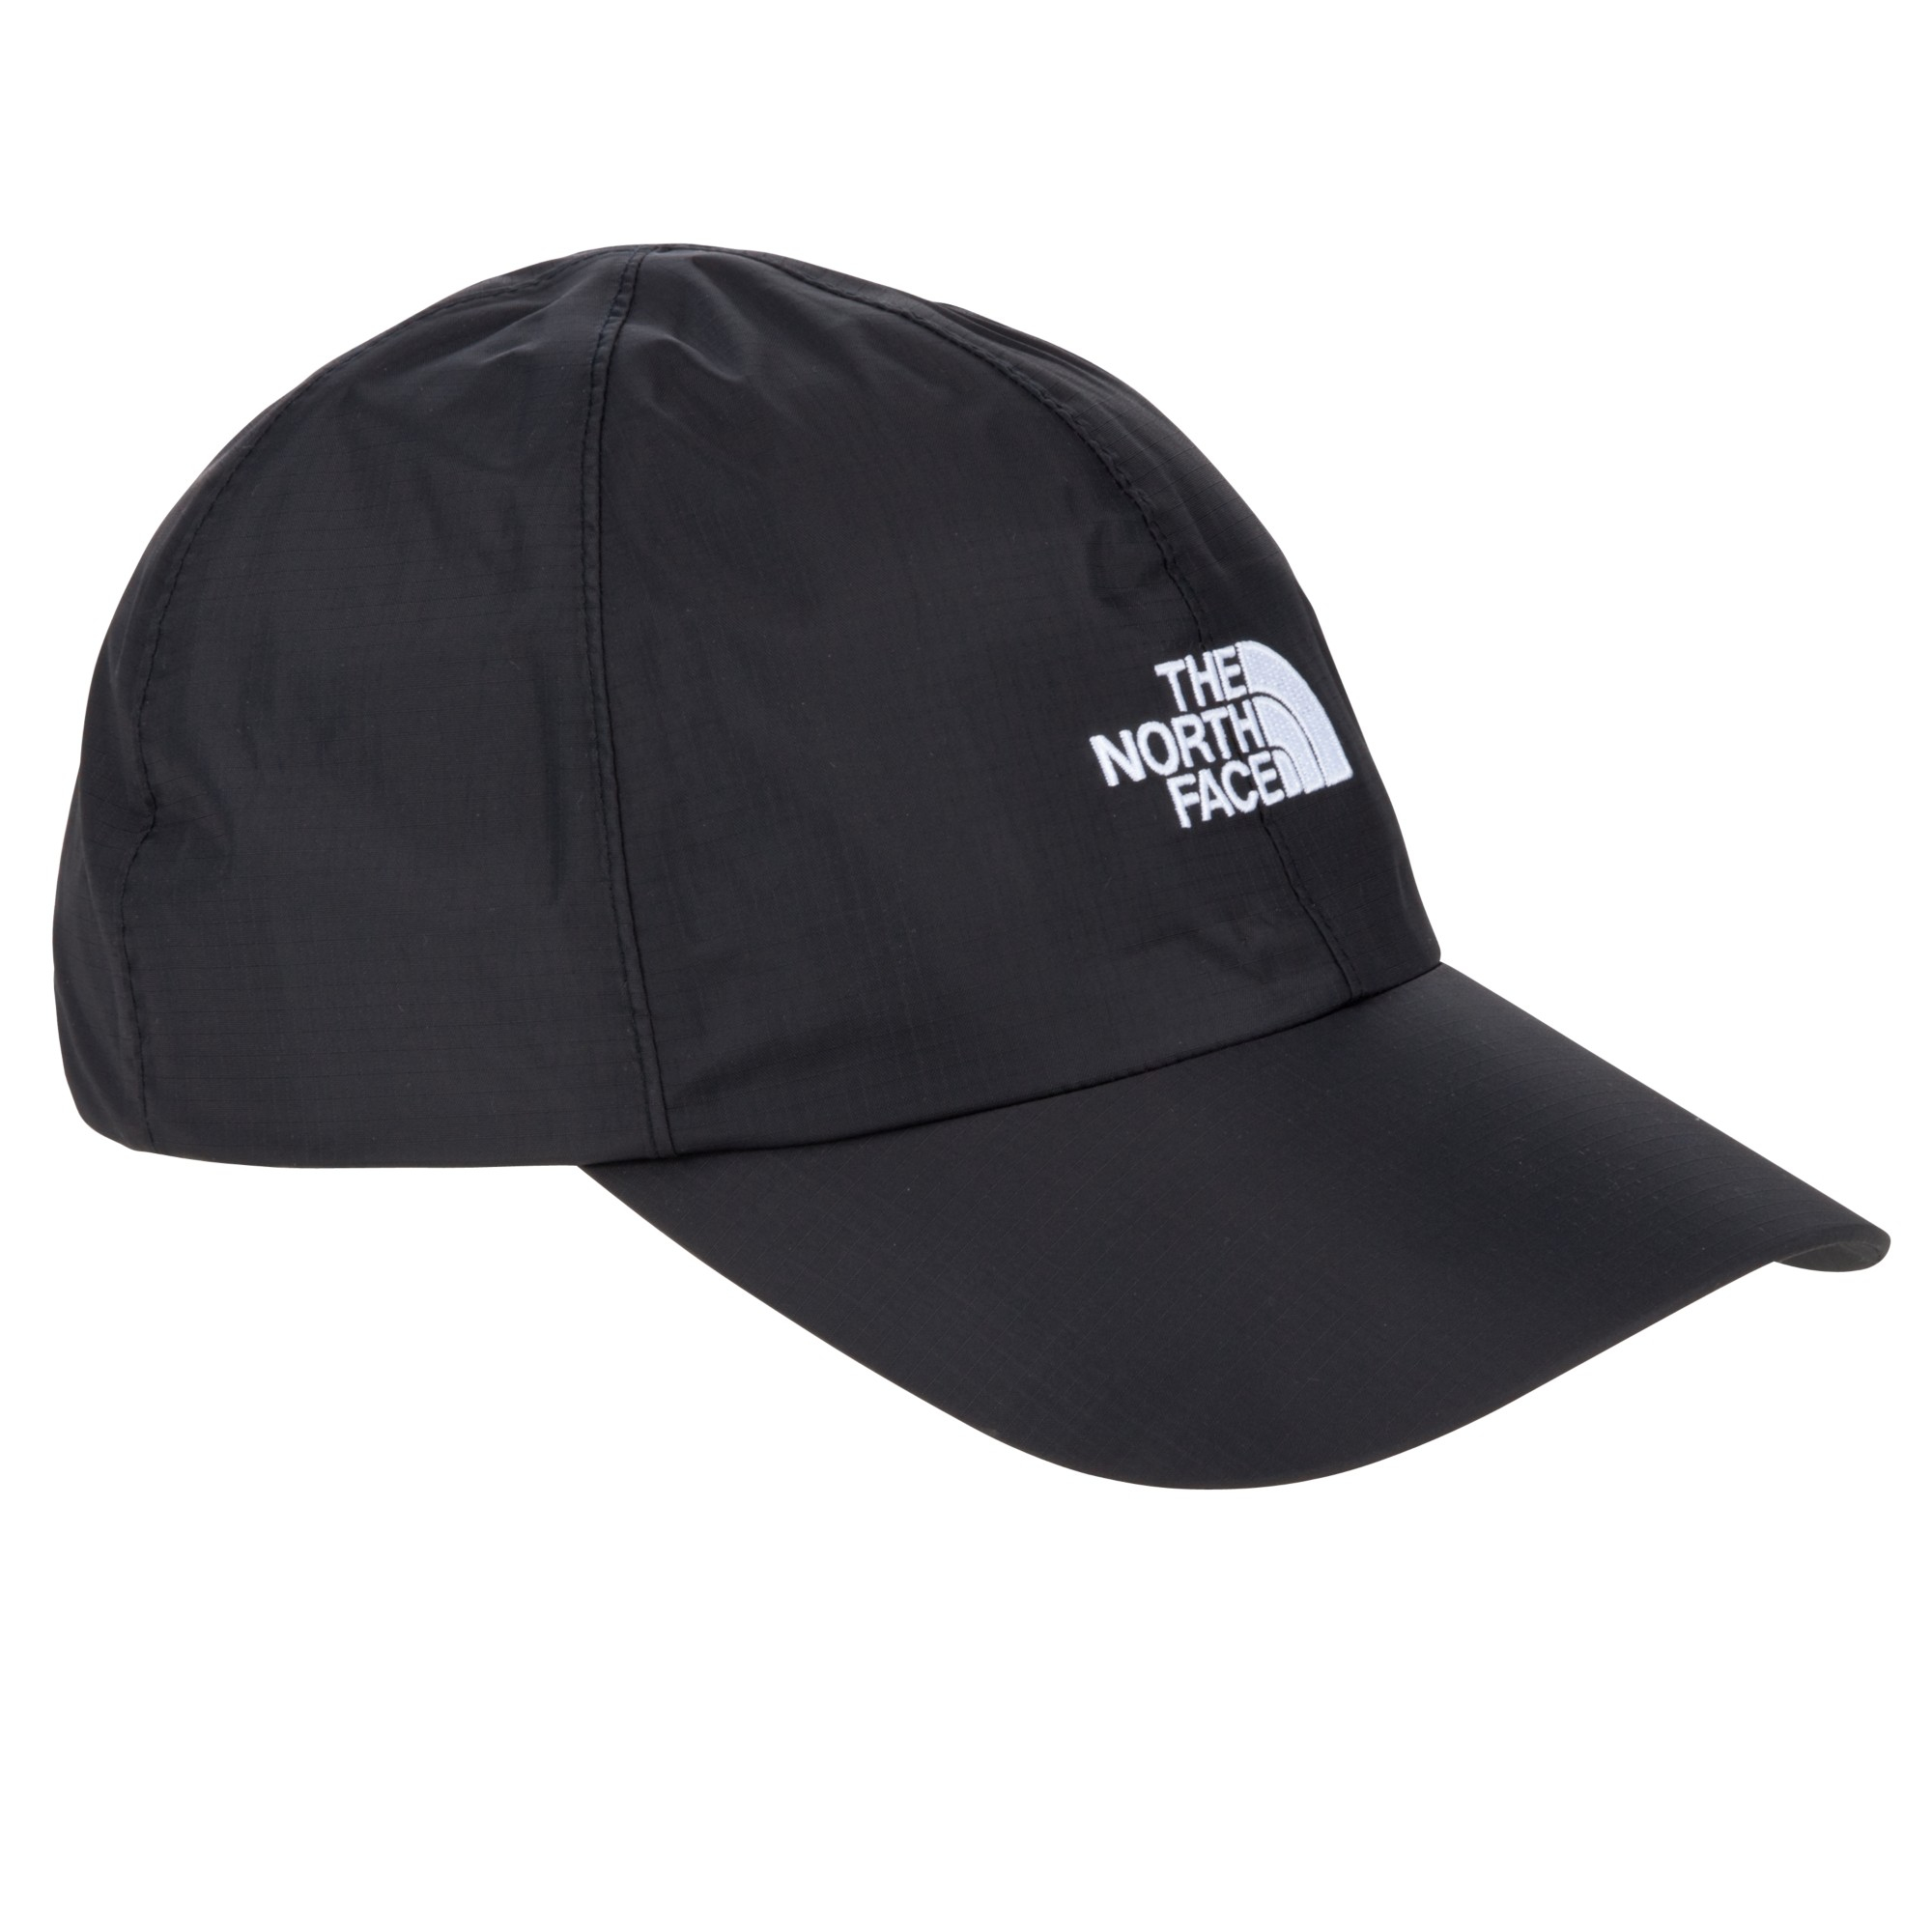 The North Face Dryvent Logo Hat in Black for Men - Lyst